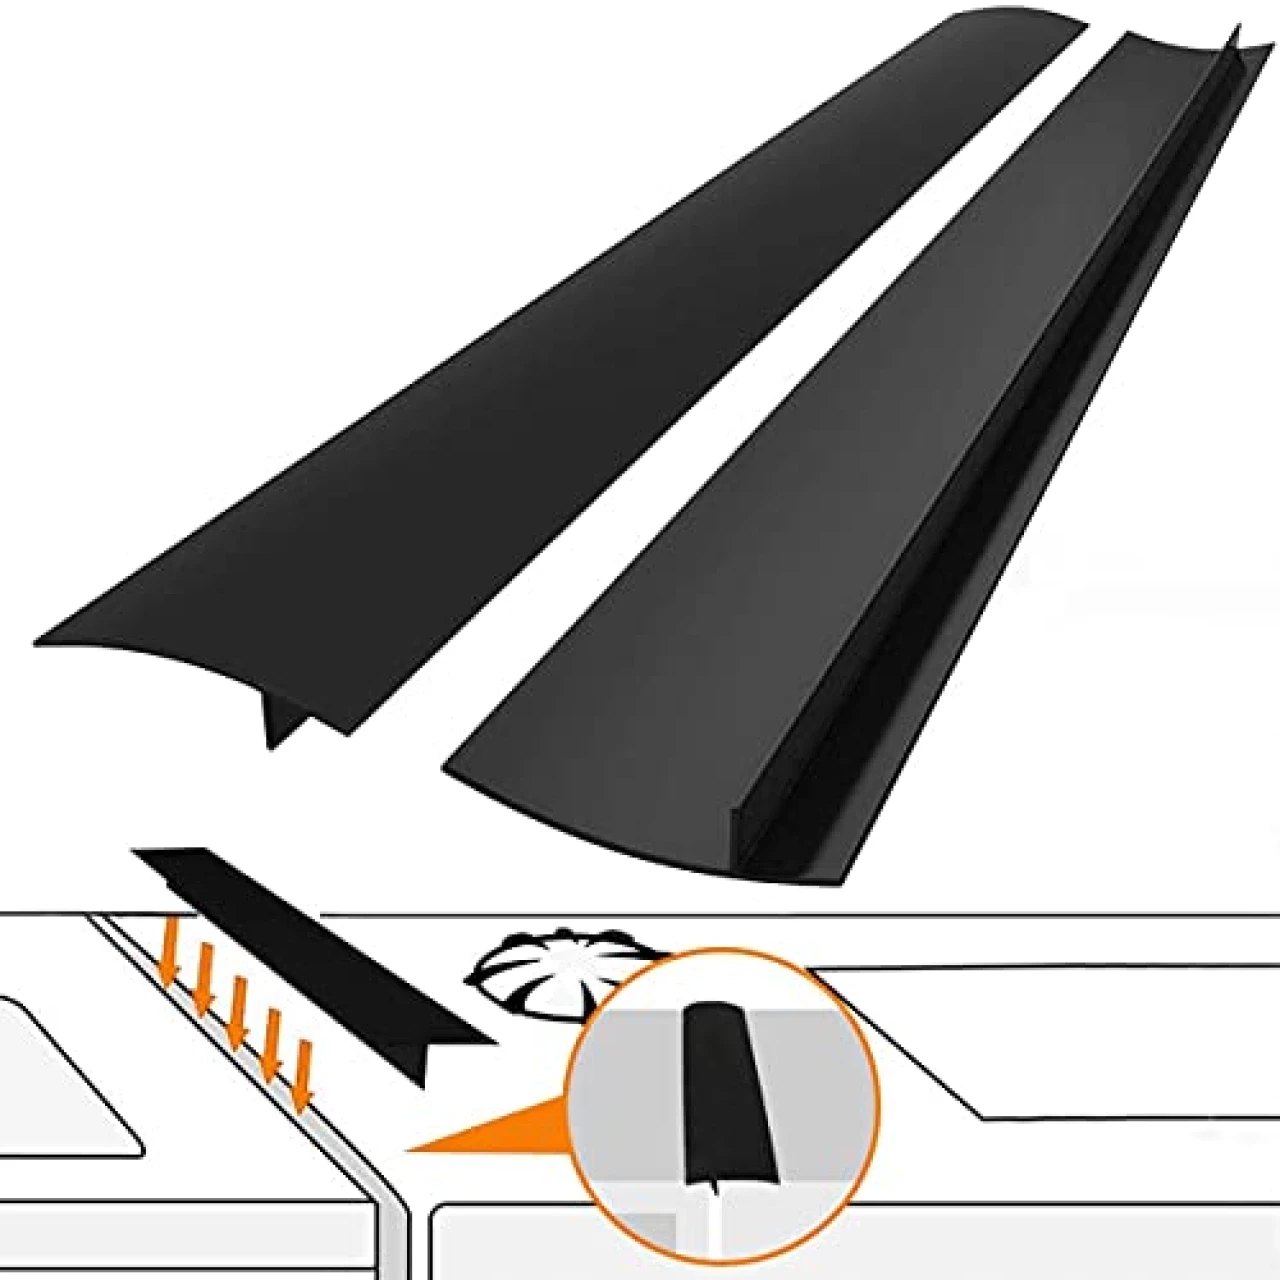 Kitchen Stove Counter Gap Cover (2 Pack) Silicone Gap Cover with Heat Resistant Wide &amp; Long Gap Filler Used for Protect Gap Filler Sealing Spills in Kitchen Counter, Stovetops Black 21 Inches